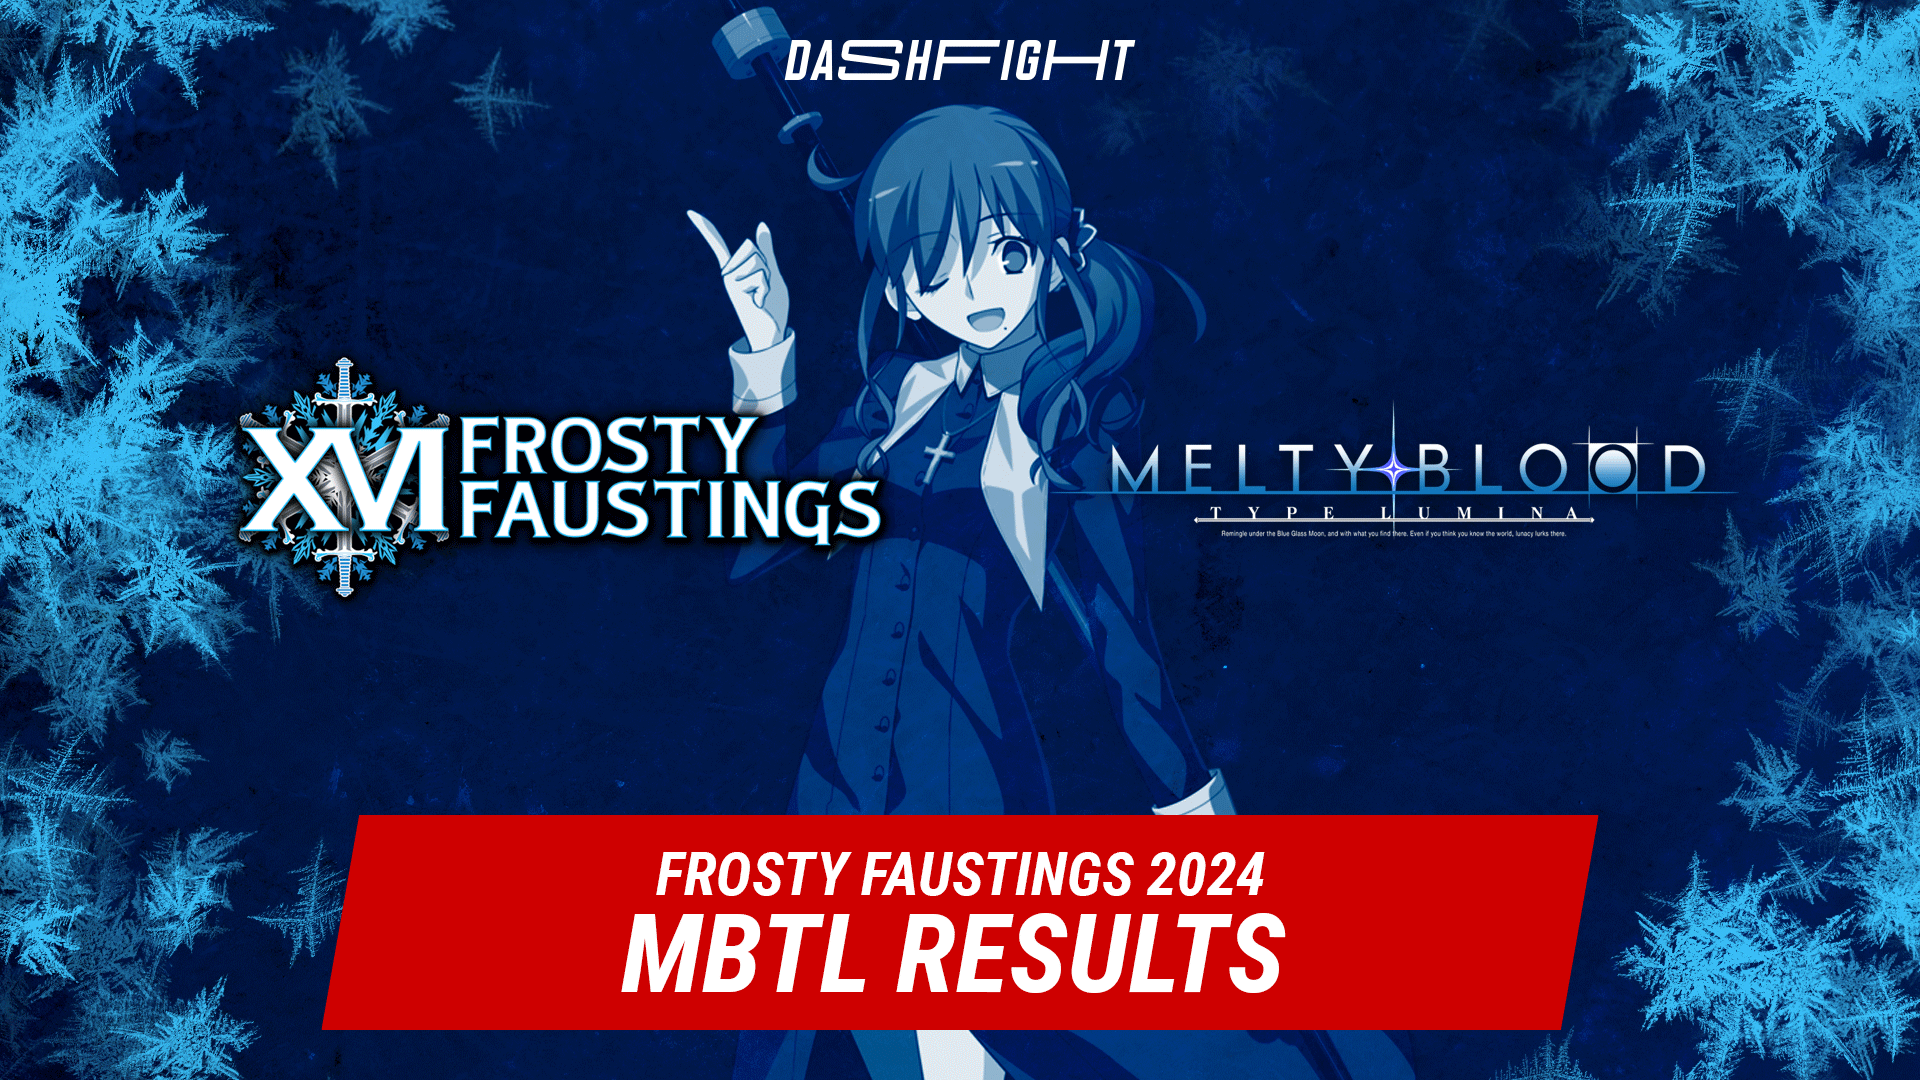 Frosty Faustings XVI 2024: Metly Blood Type Lumina Results